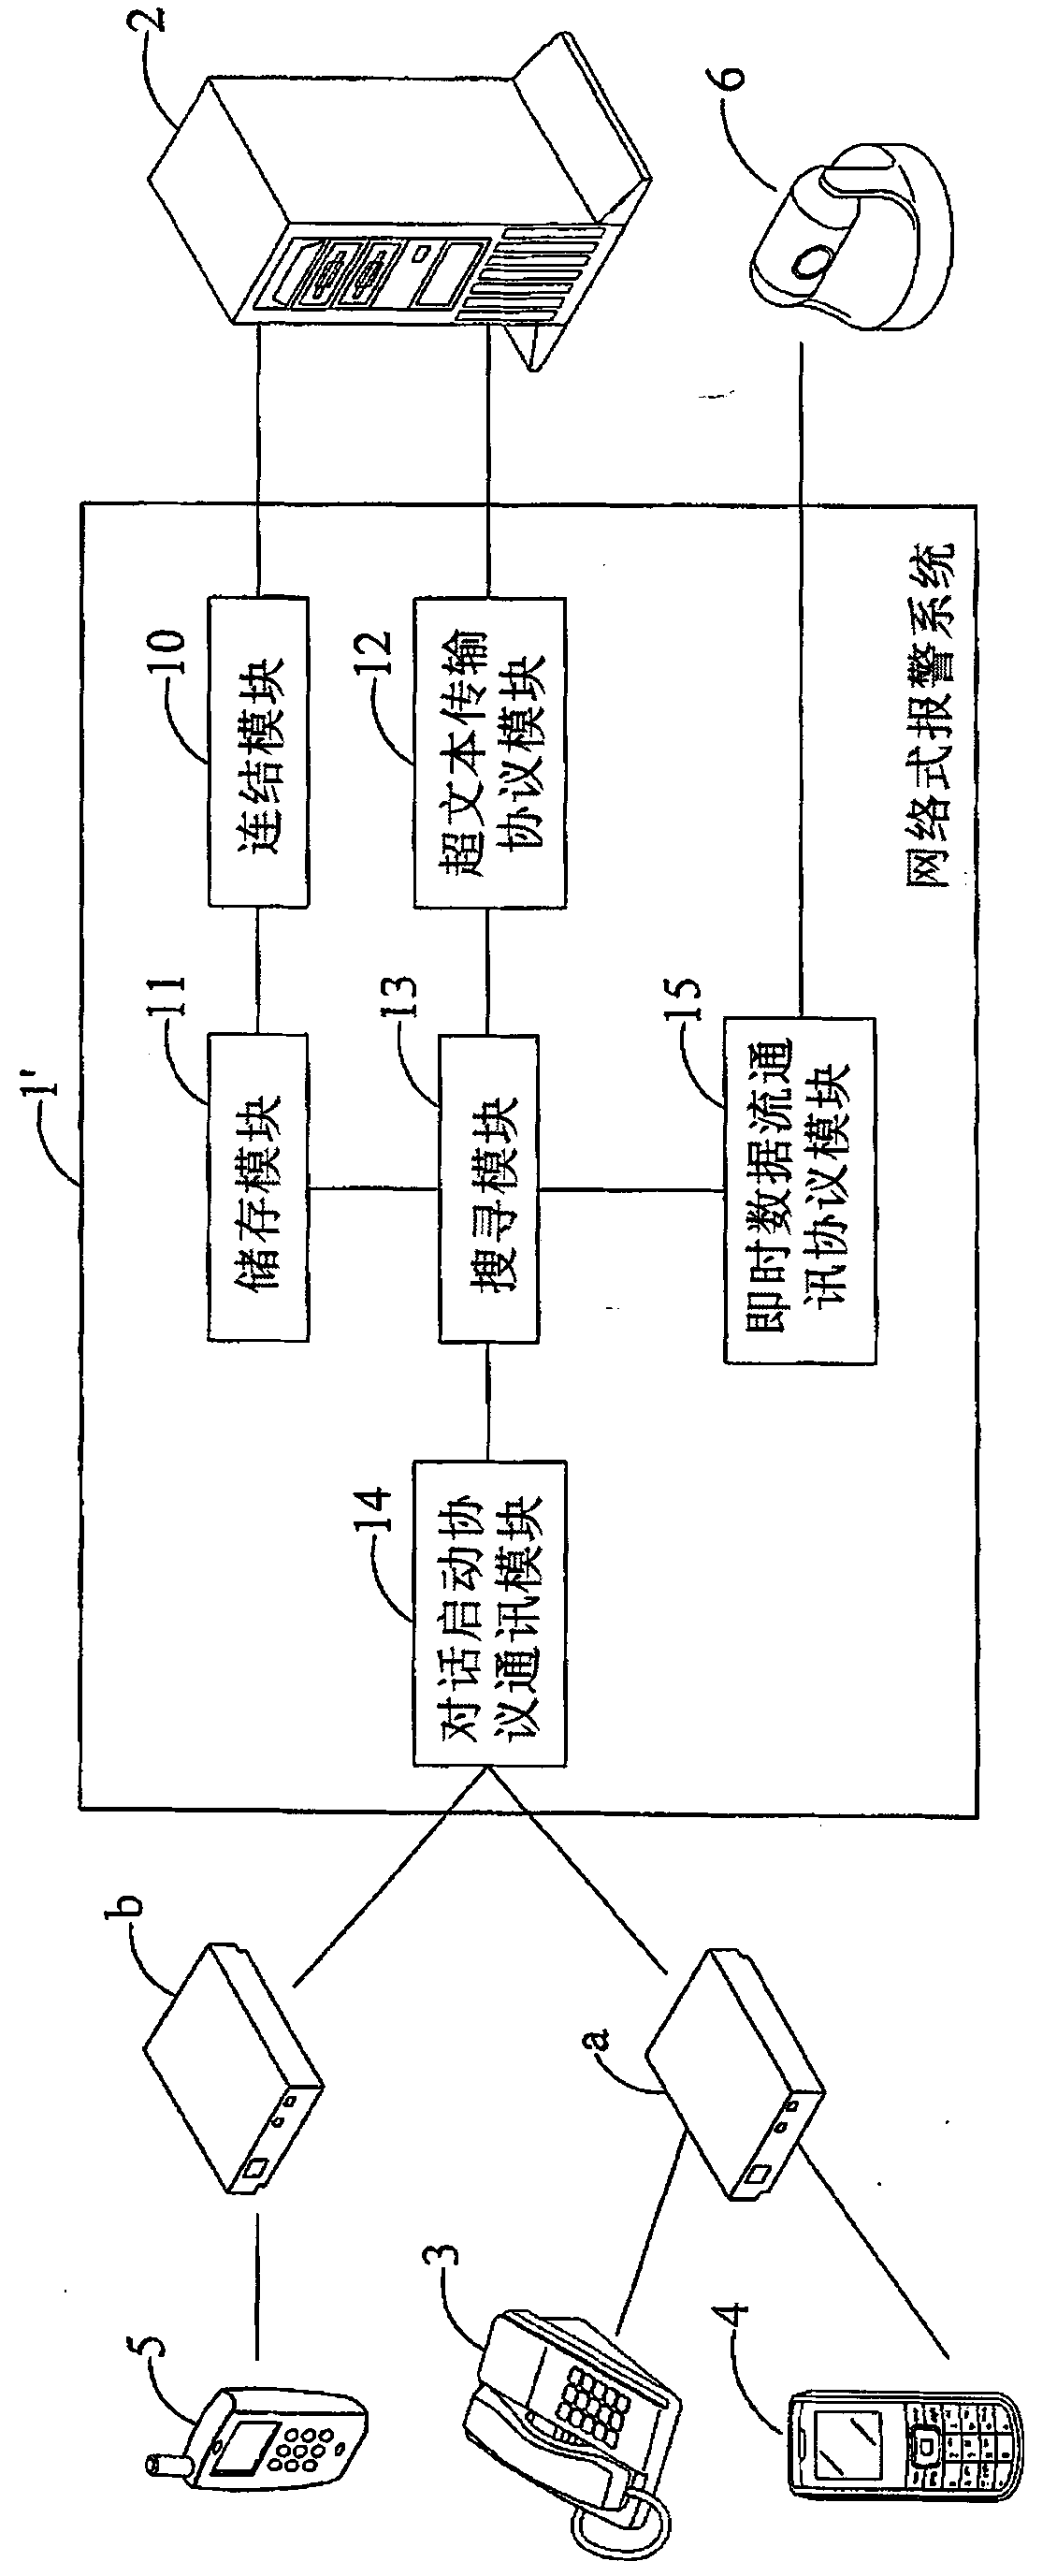 Network type alarming system and method